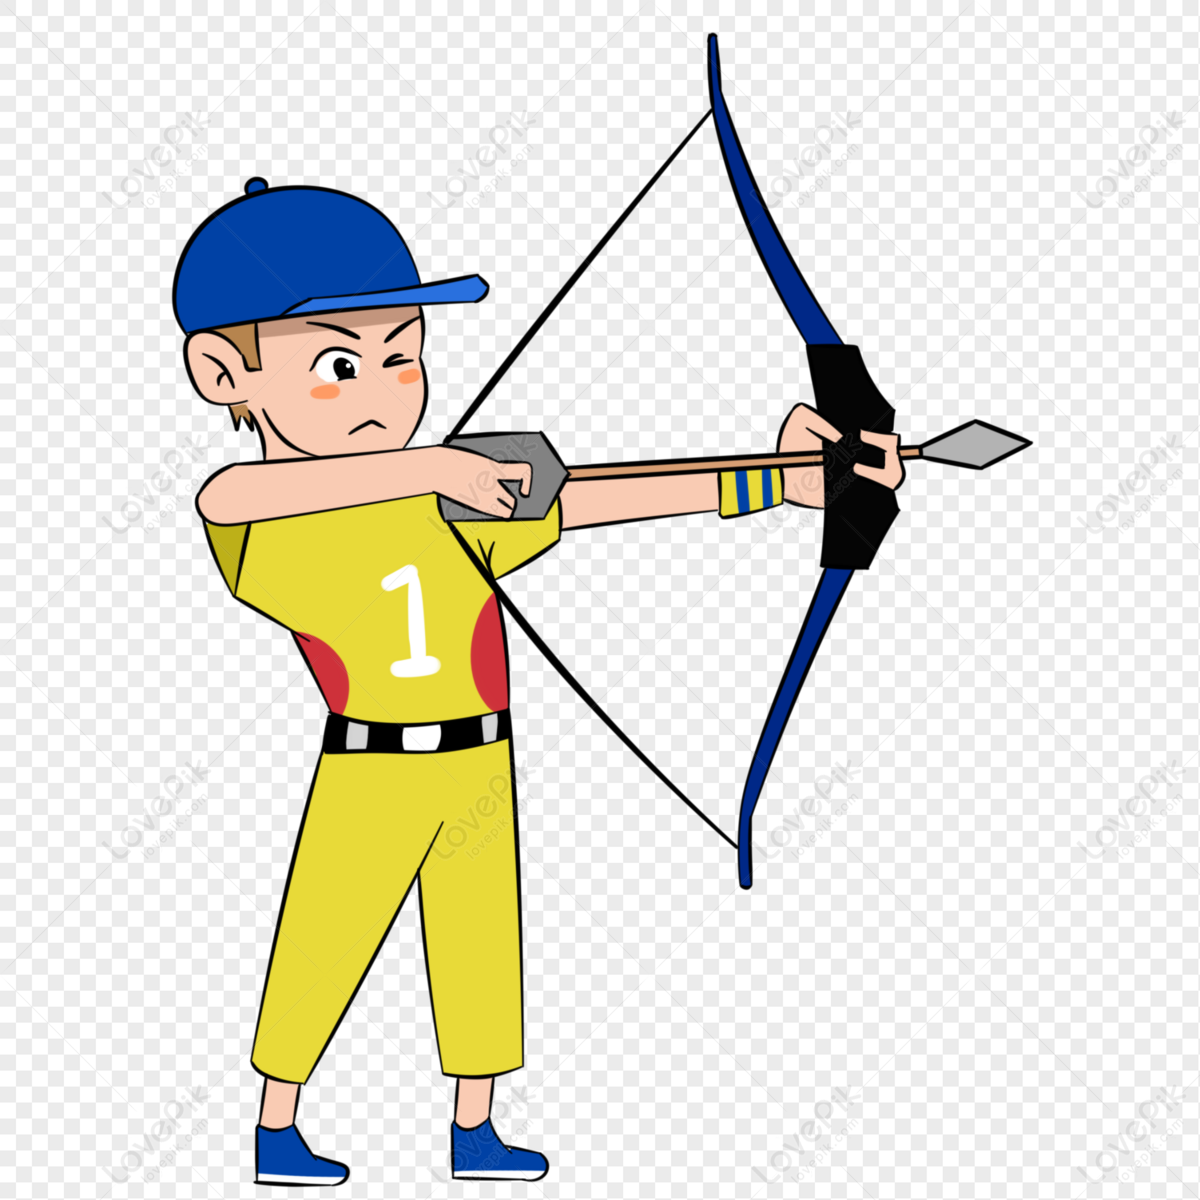 Shooting Archery Player Cartoon Hand Drawn PNG White Transparent And  Clipart Image For Free Download - Lovepik | 401378922